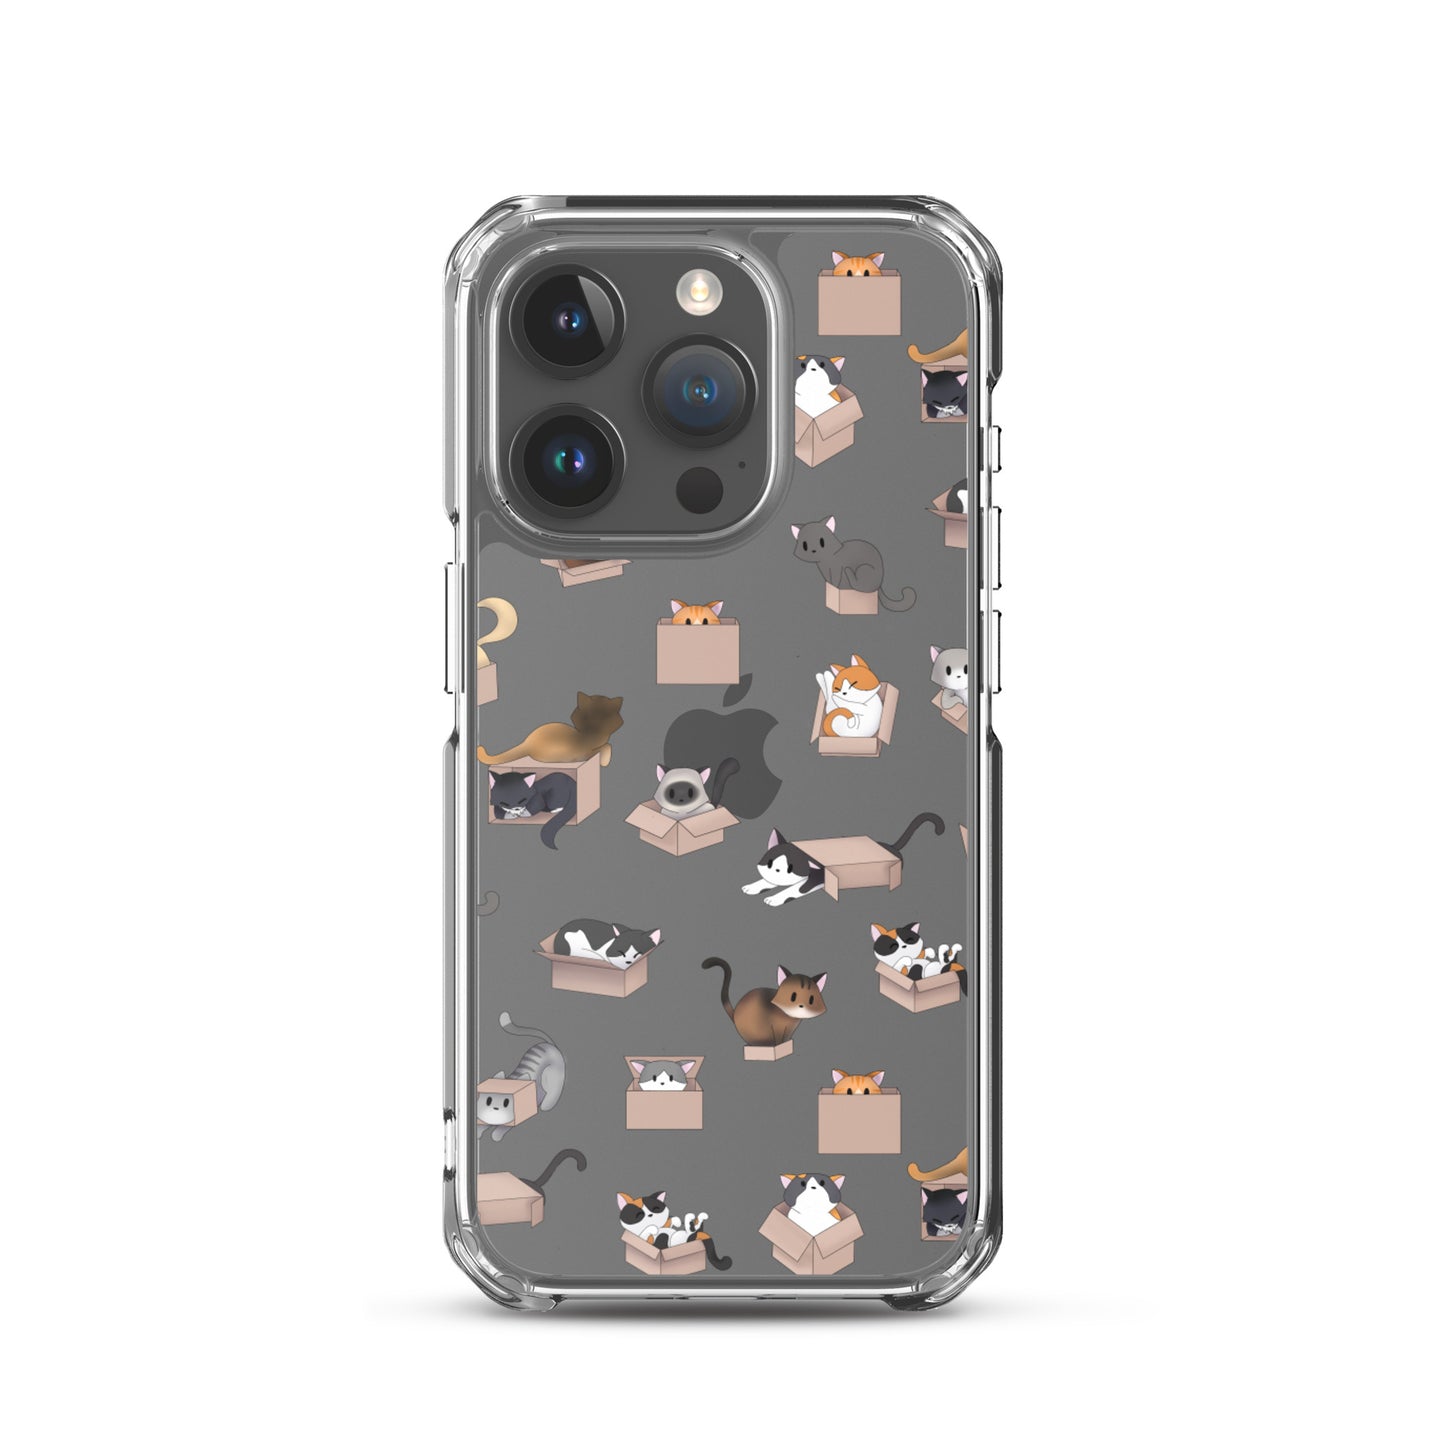 Kitty in a Box iPhone Clear Case